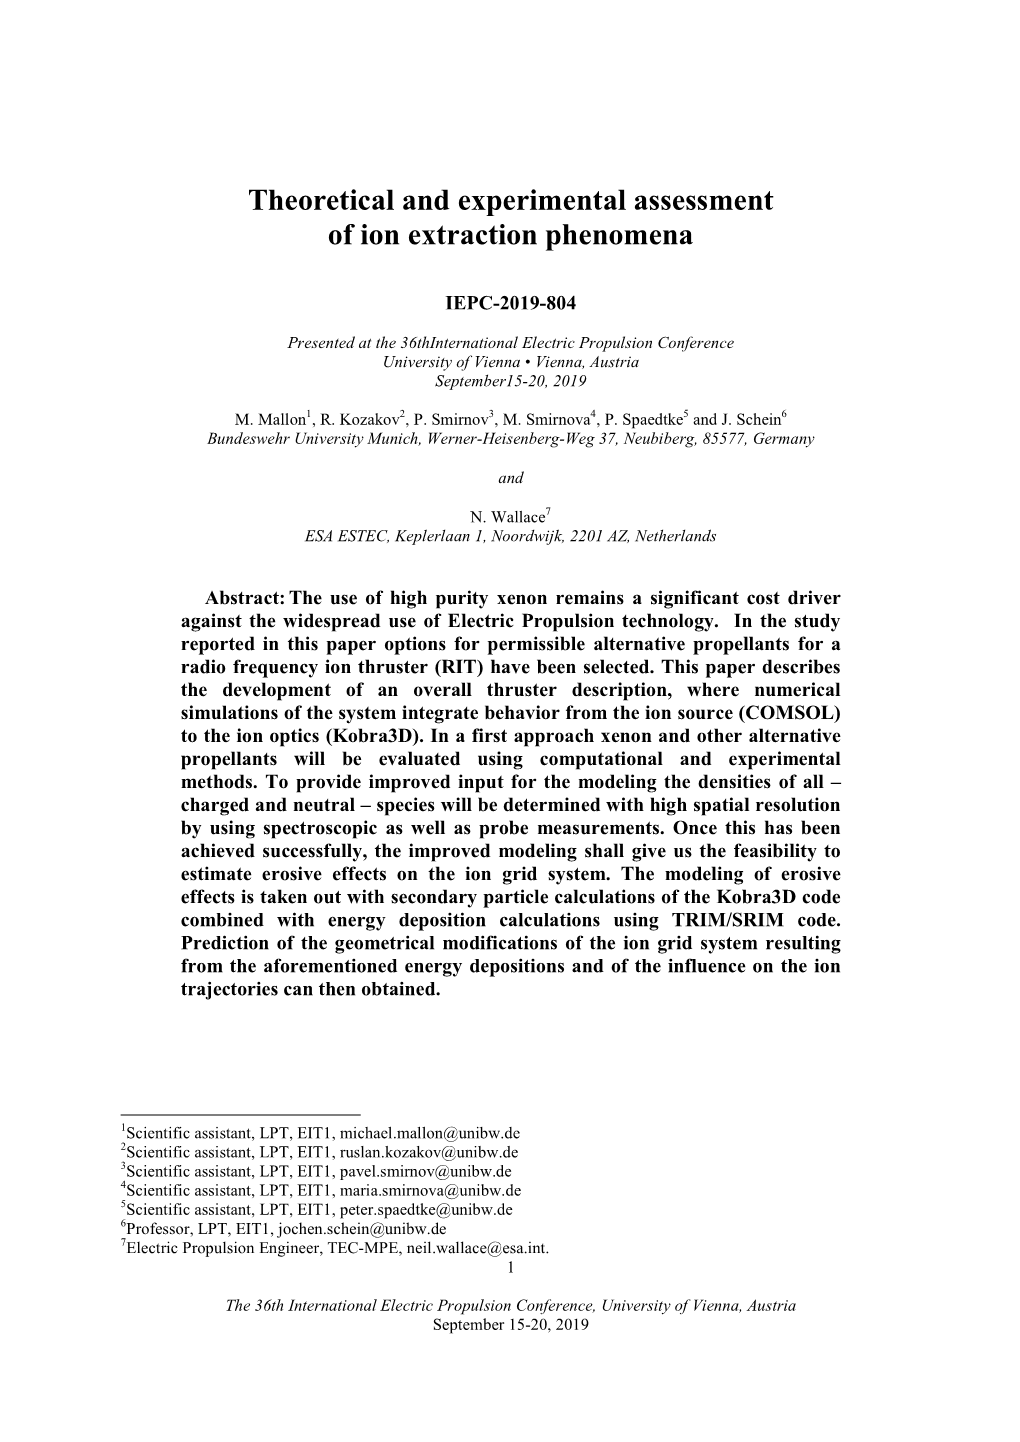 Theoretical and Experimental Assessment of Ion Extraction Phenomena